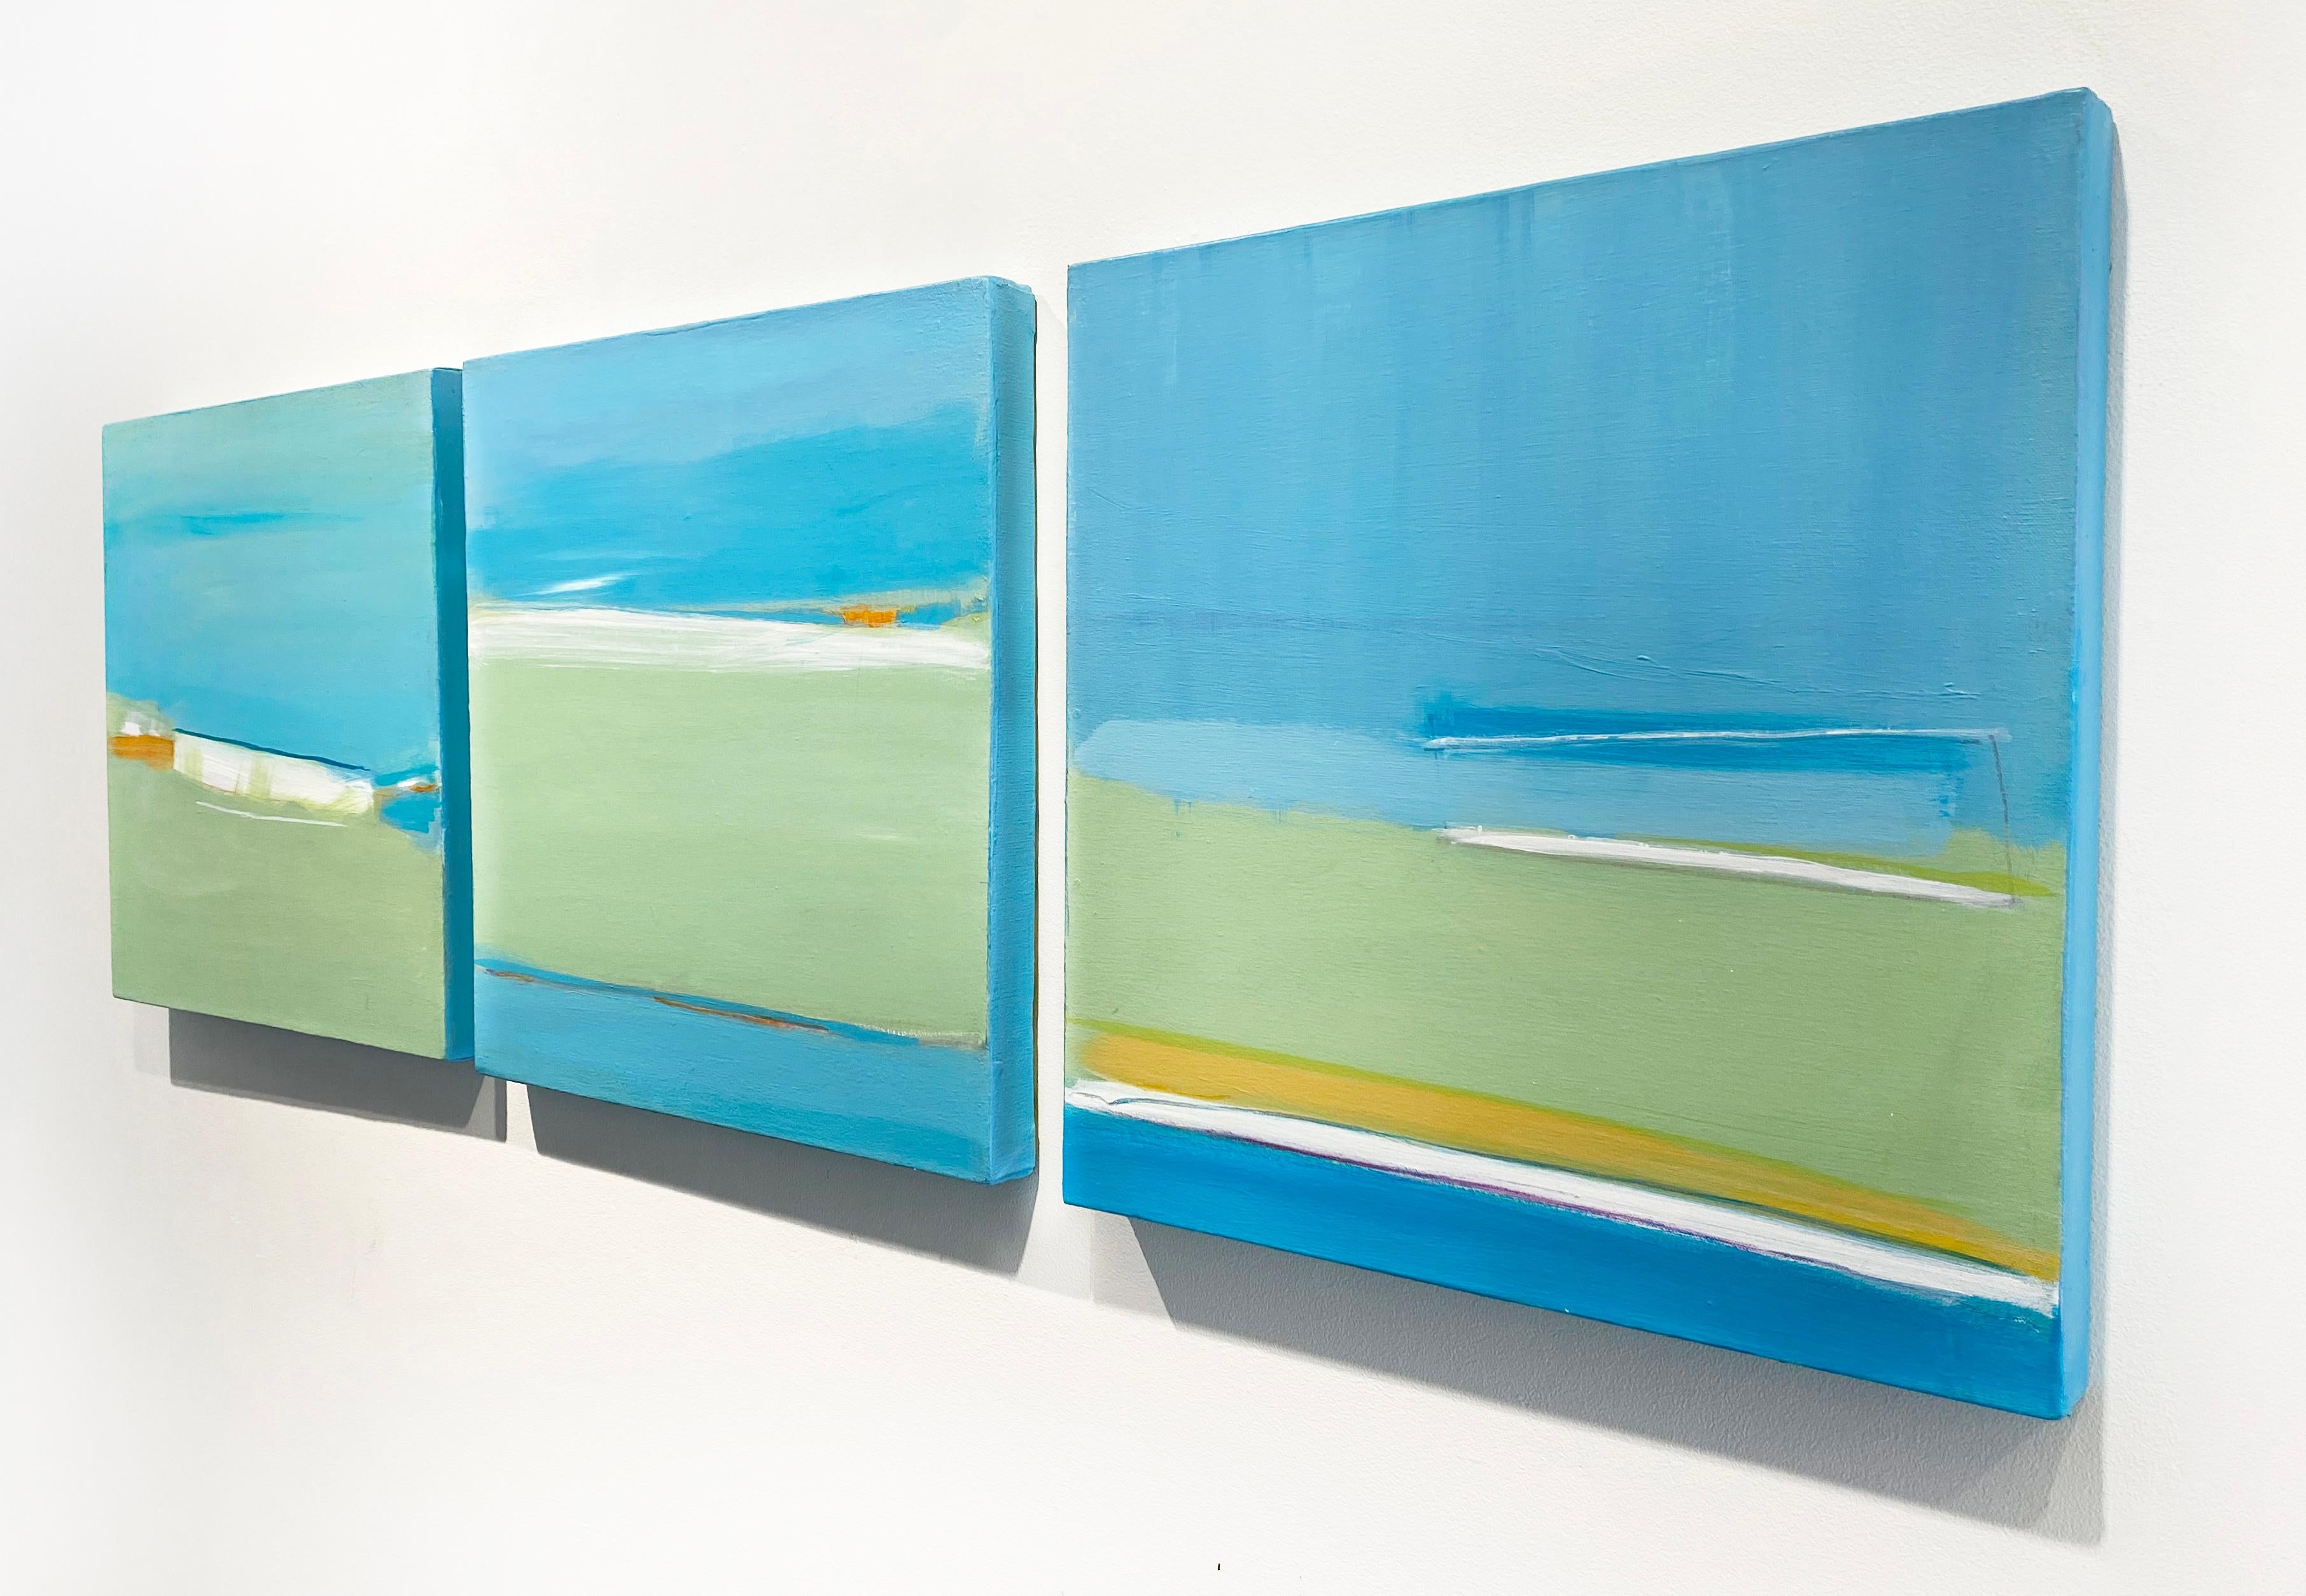 'Gaze' 2021 by Linda Nisselson. Acrylic on canvas, triptych, 18 x 54 inches, 18 x 18 in each. This colorful abstract painting features bright shades of blue, green, white, and orange.

Abstract Expressionist painter Linda Nisselson's paintings are